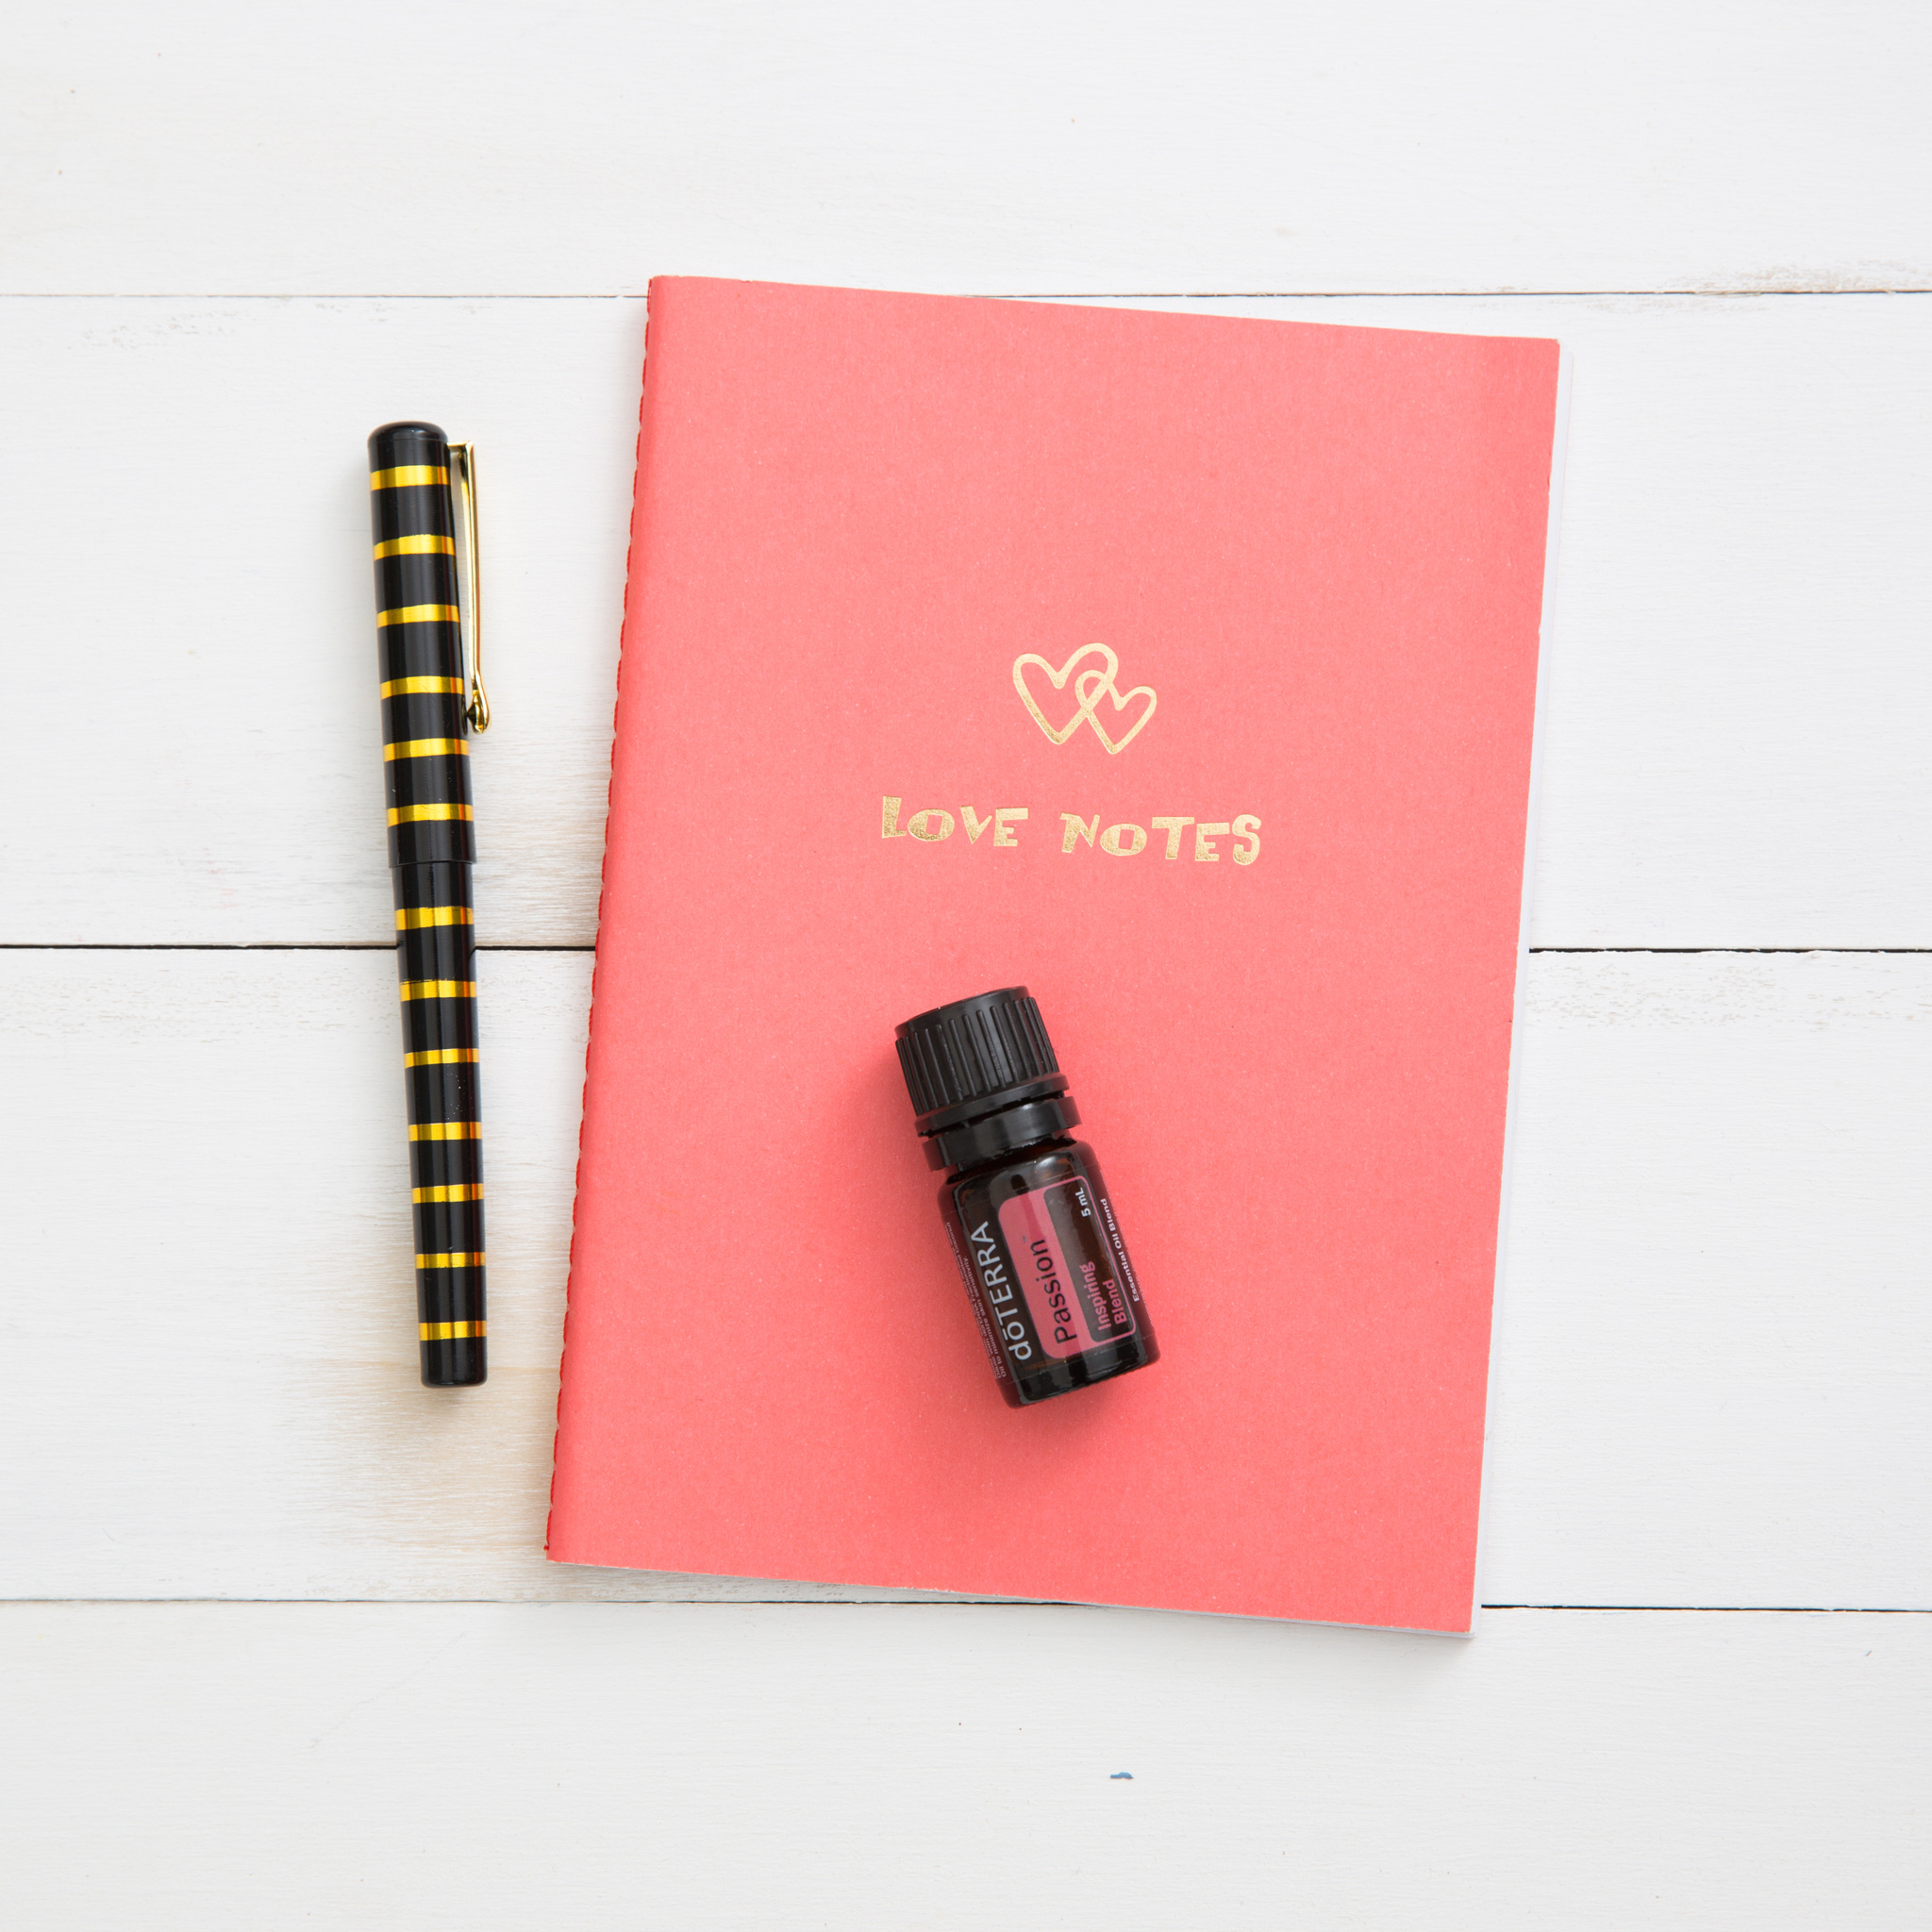 Try diffusing doTERRA Passion Inspiring Blend during your romantic dinner to kindle feelings of excitement, passion and joy.